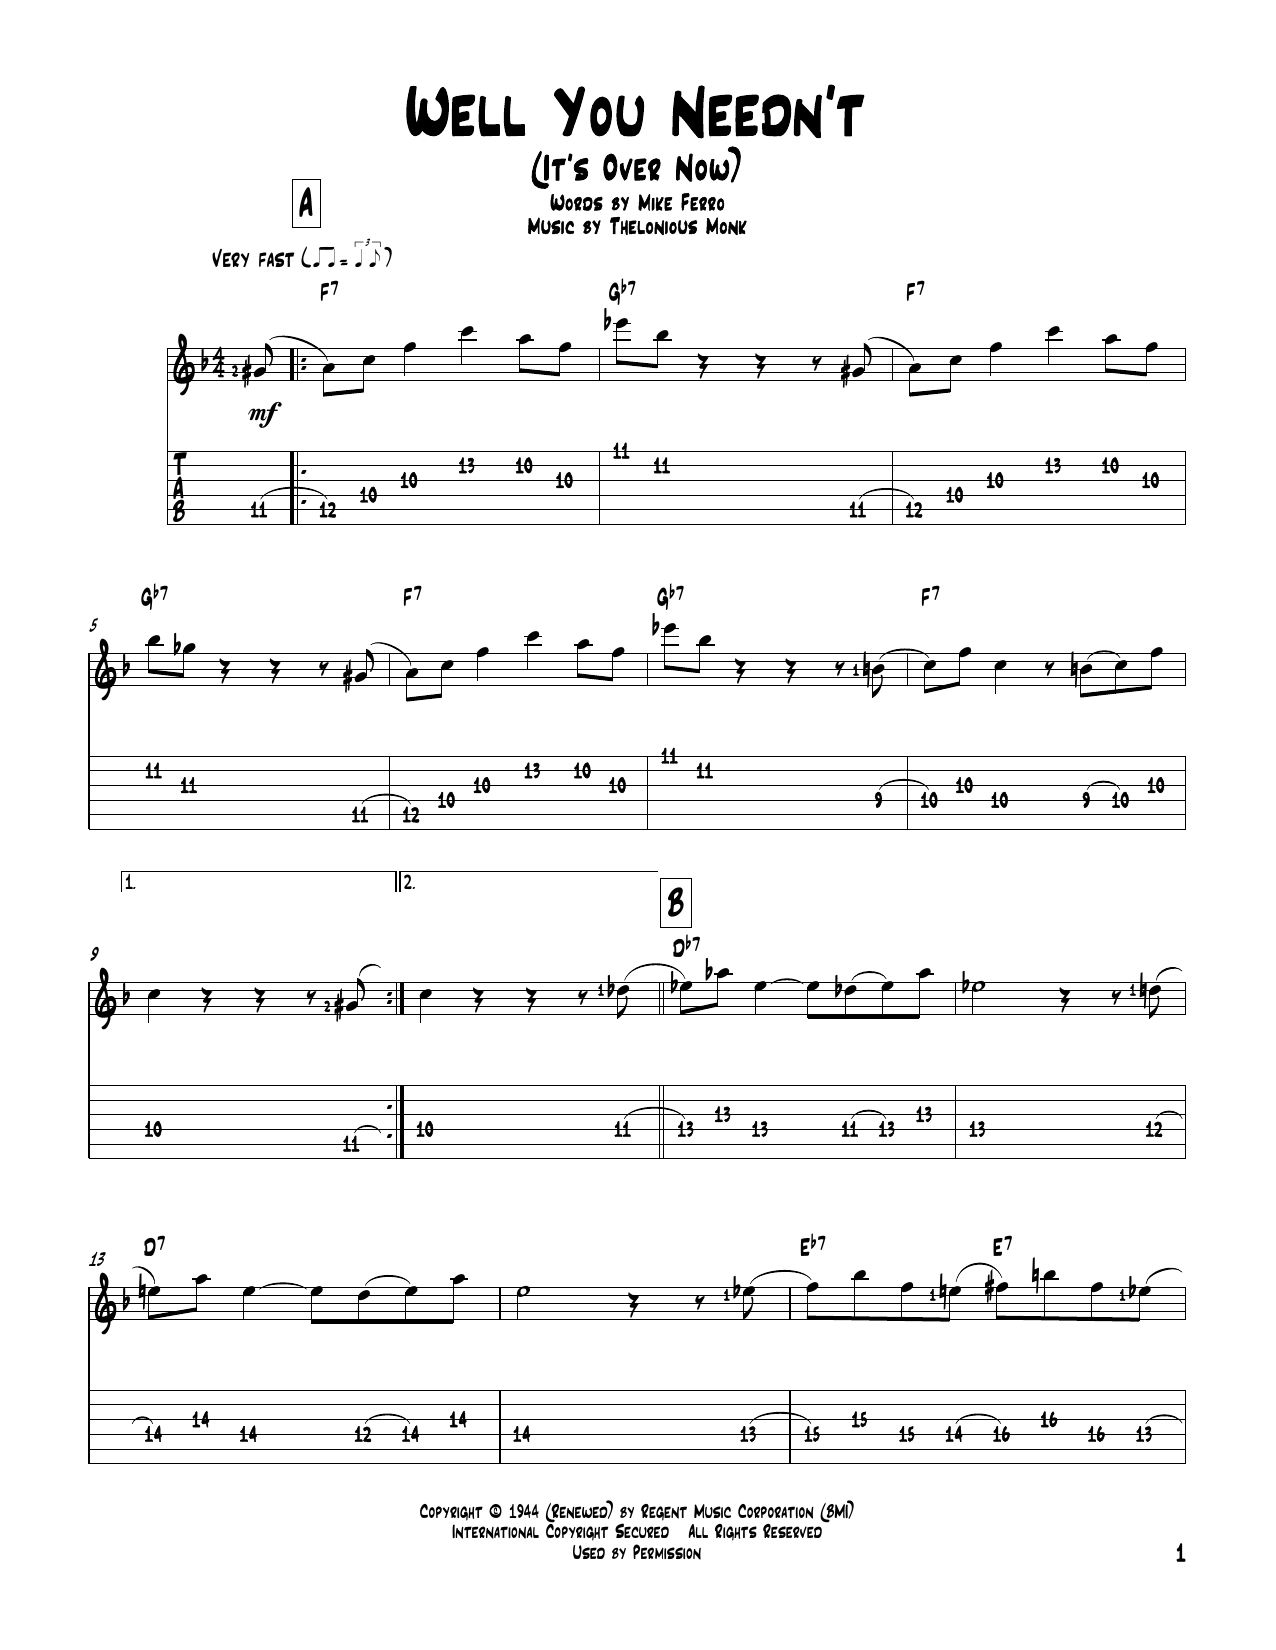 Download Thelonious Monk Well You Needn't (It's Over Now) Sheet Music